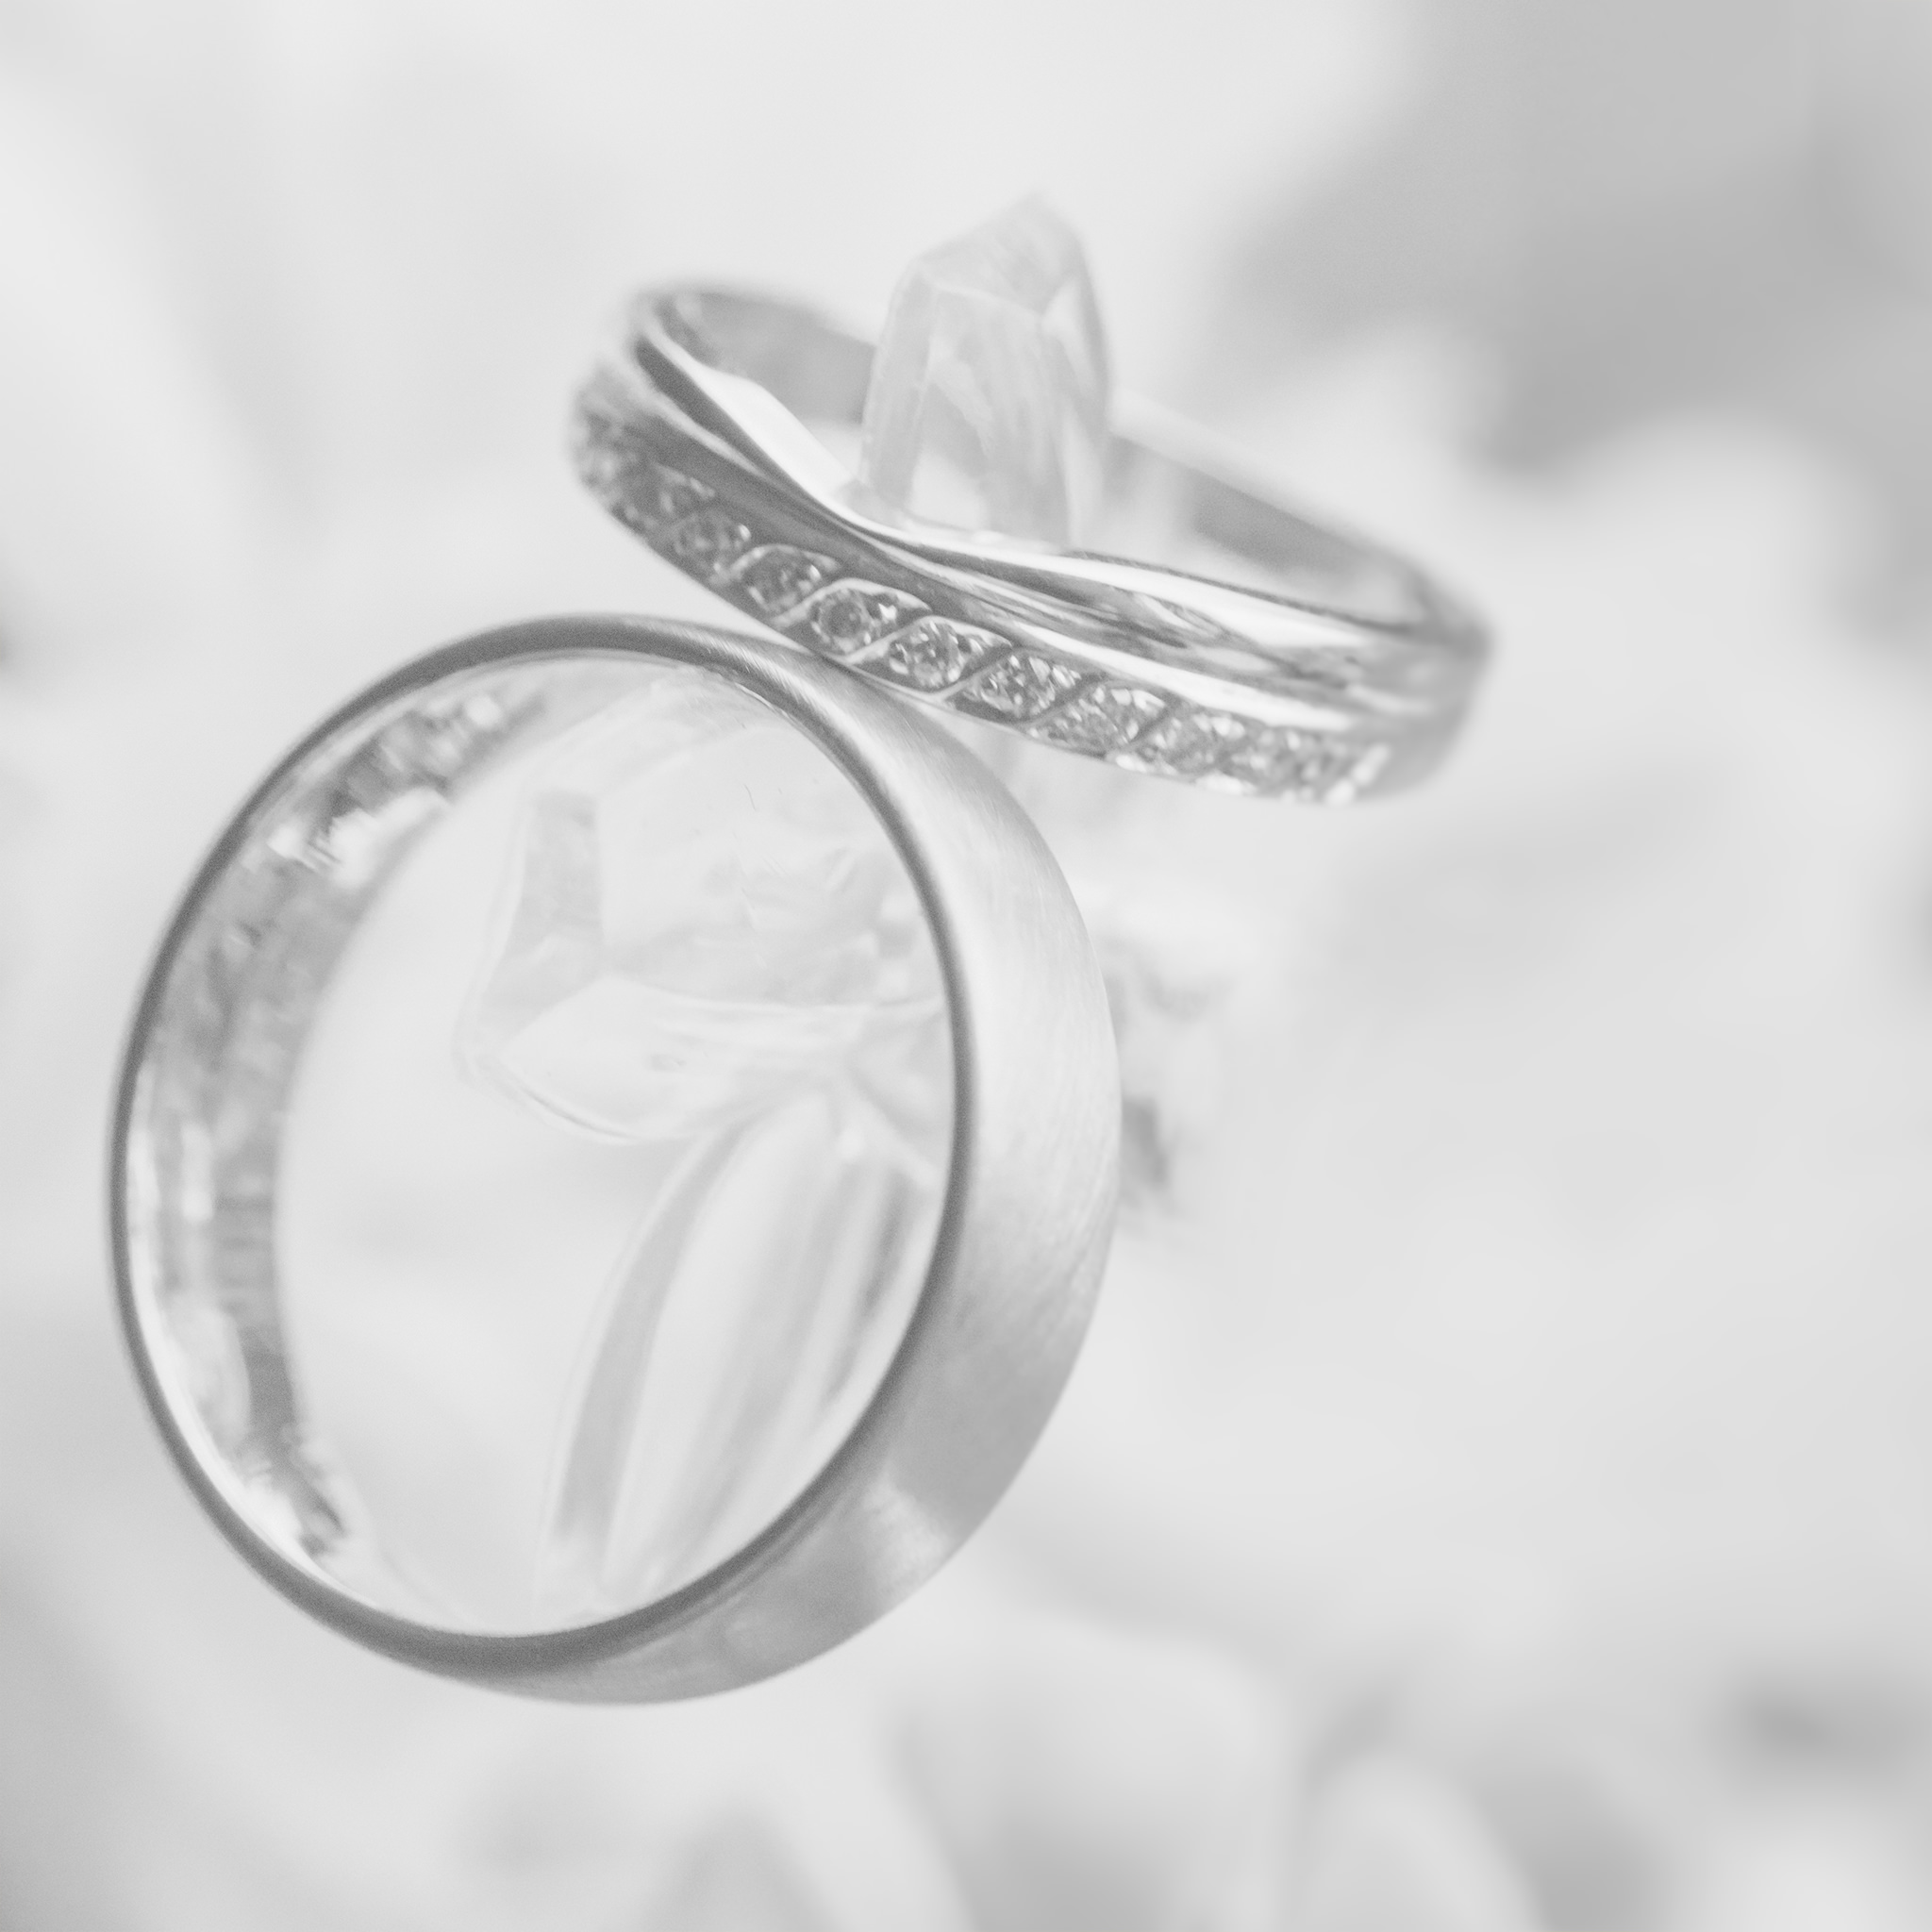 close up of the wedding rings in black and white